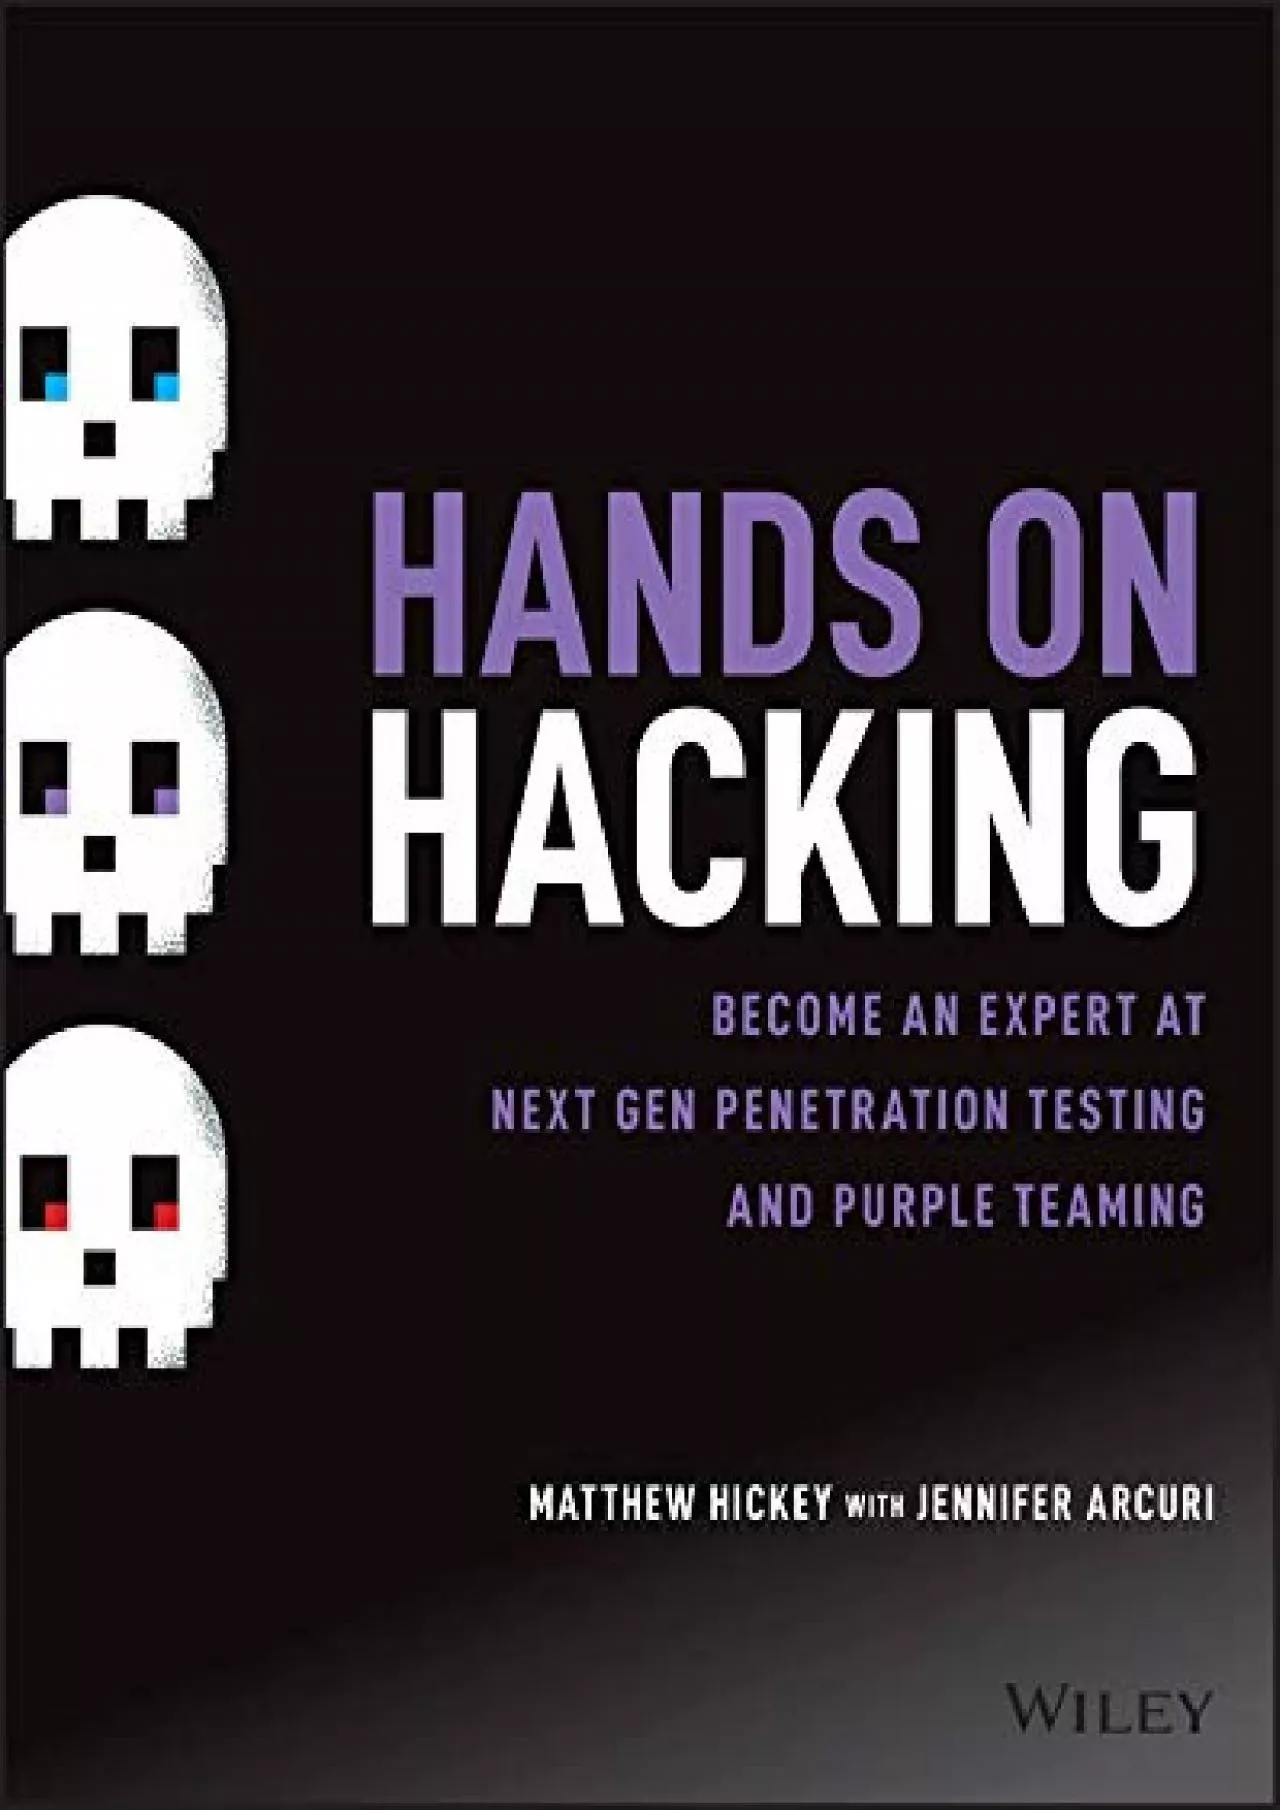 (EBOOK)-Hands on Hacking: Become an Expert at Next Gen Penetration Testing and Purple